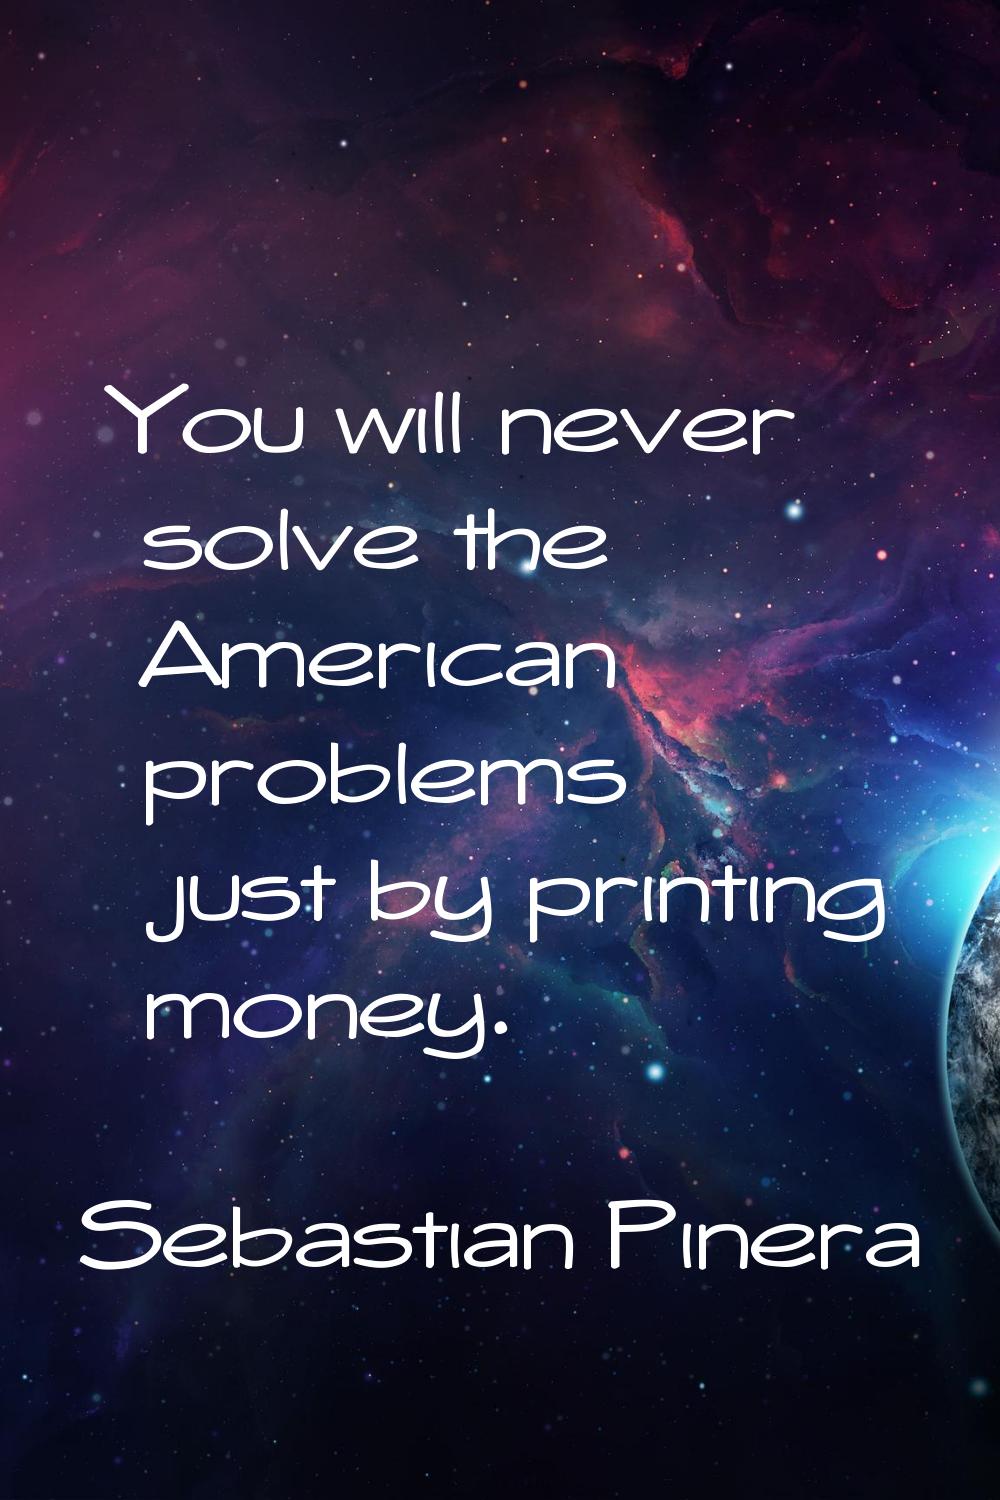 You will never solve the American problems just by printing money.